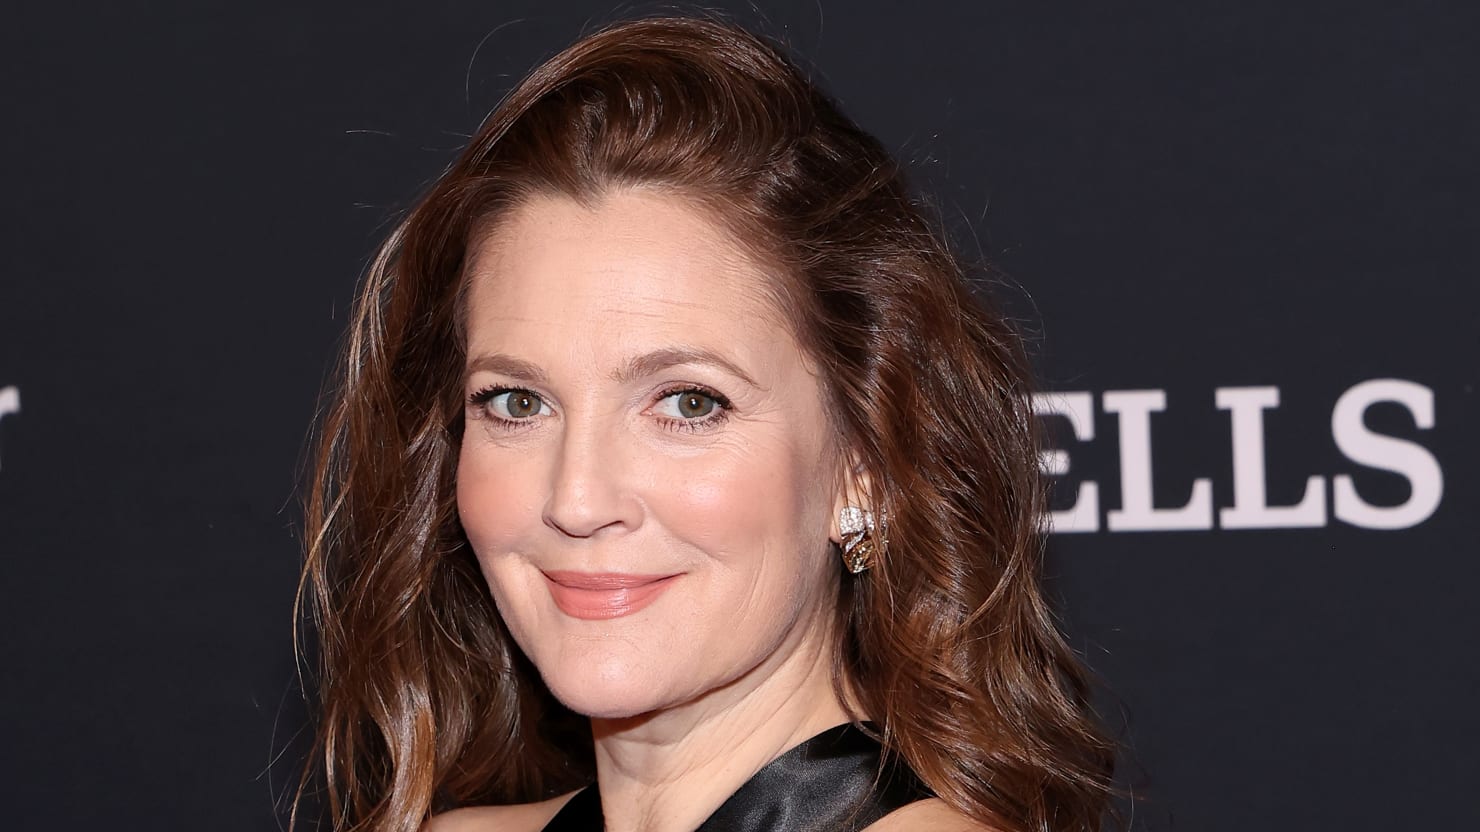 Drew Barrymore hits back at stories claiming she wishes her mother was dead